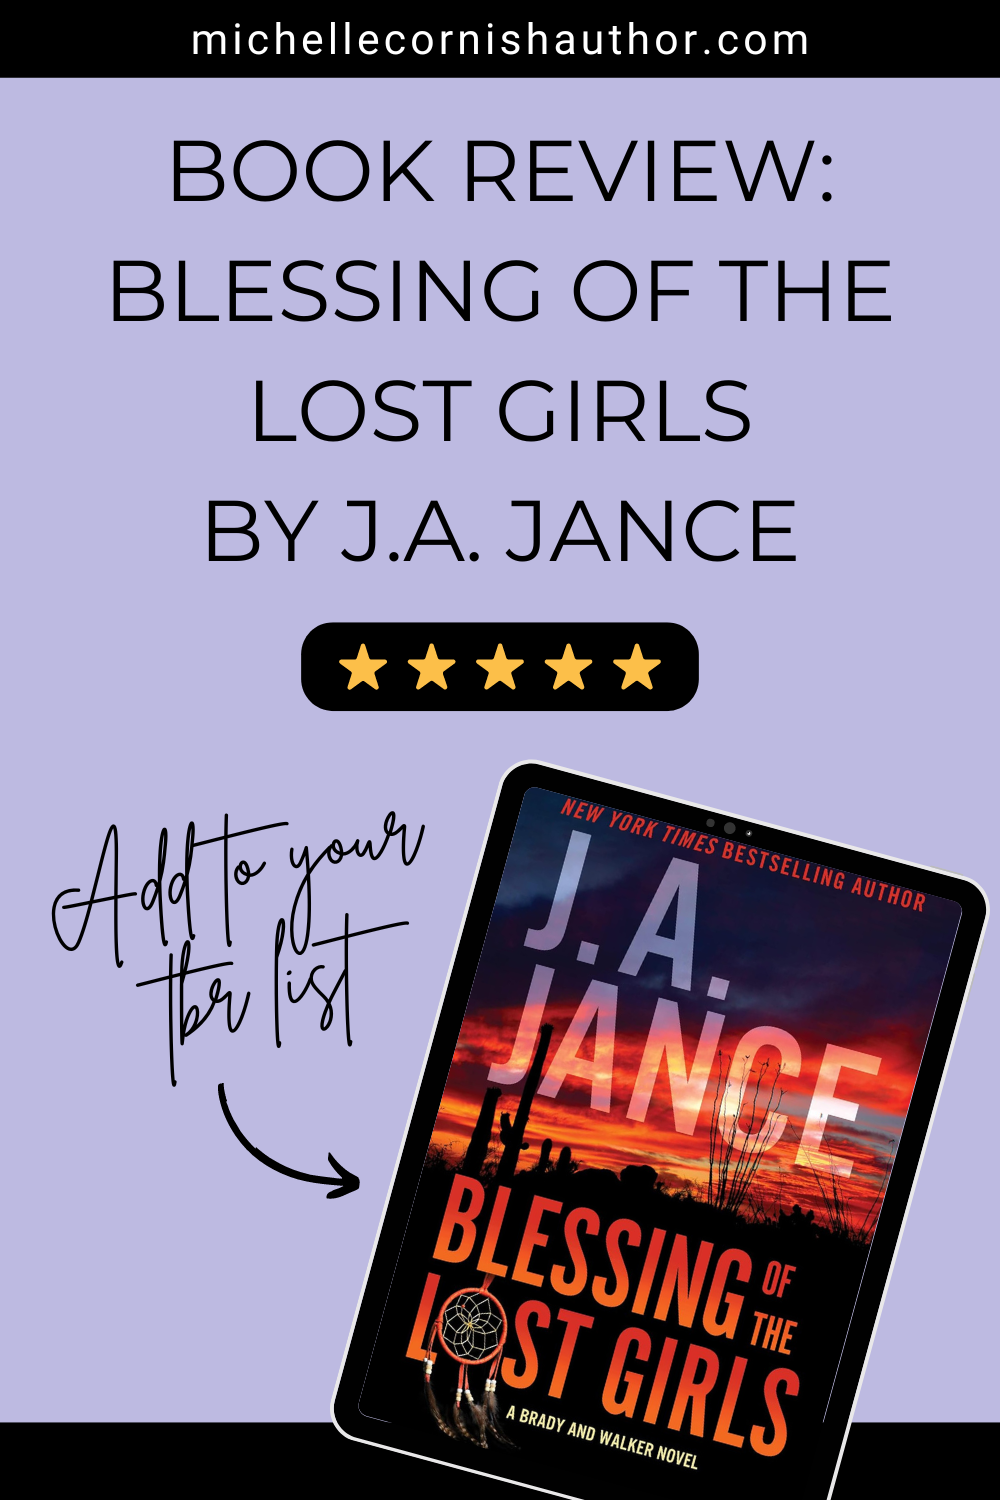 Book Review of Blessing of the Lost Girls by JA Jance